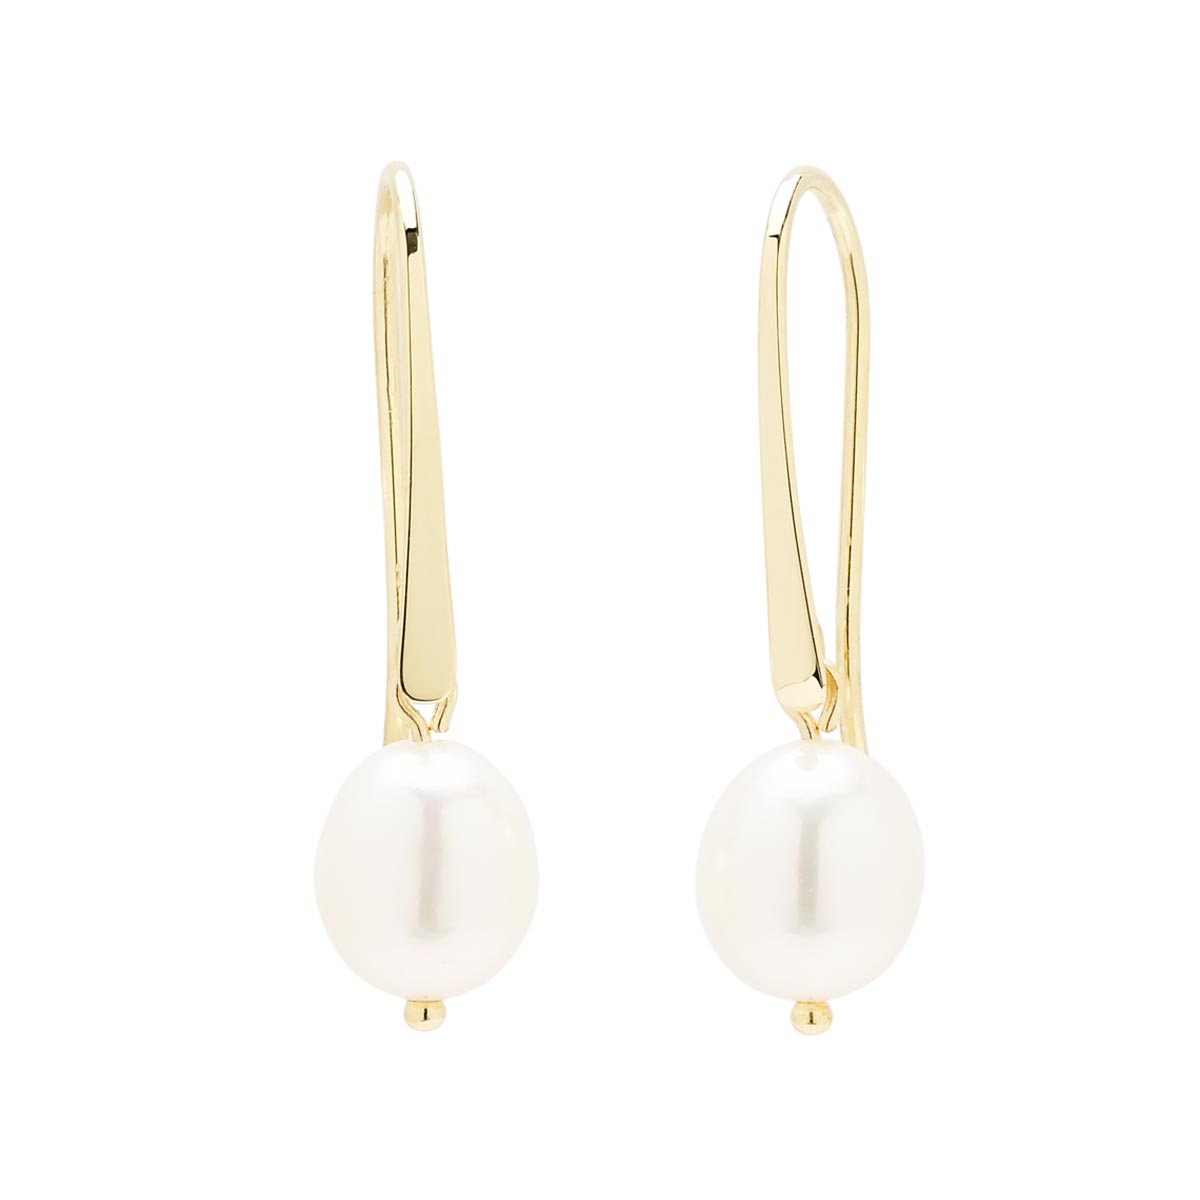 Cultured Freshwater Pearl Drop Earrings in 14kt Yellow Gold (8mm pearls)